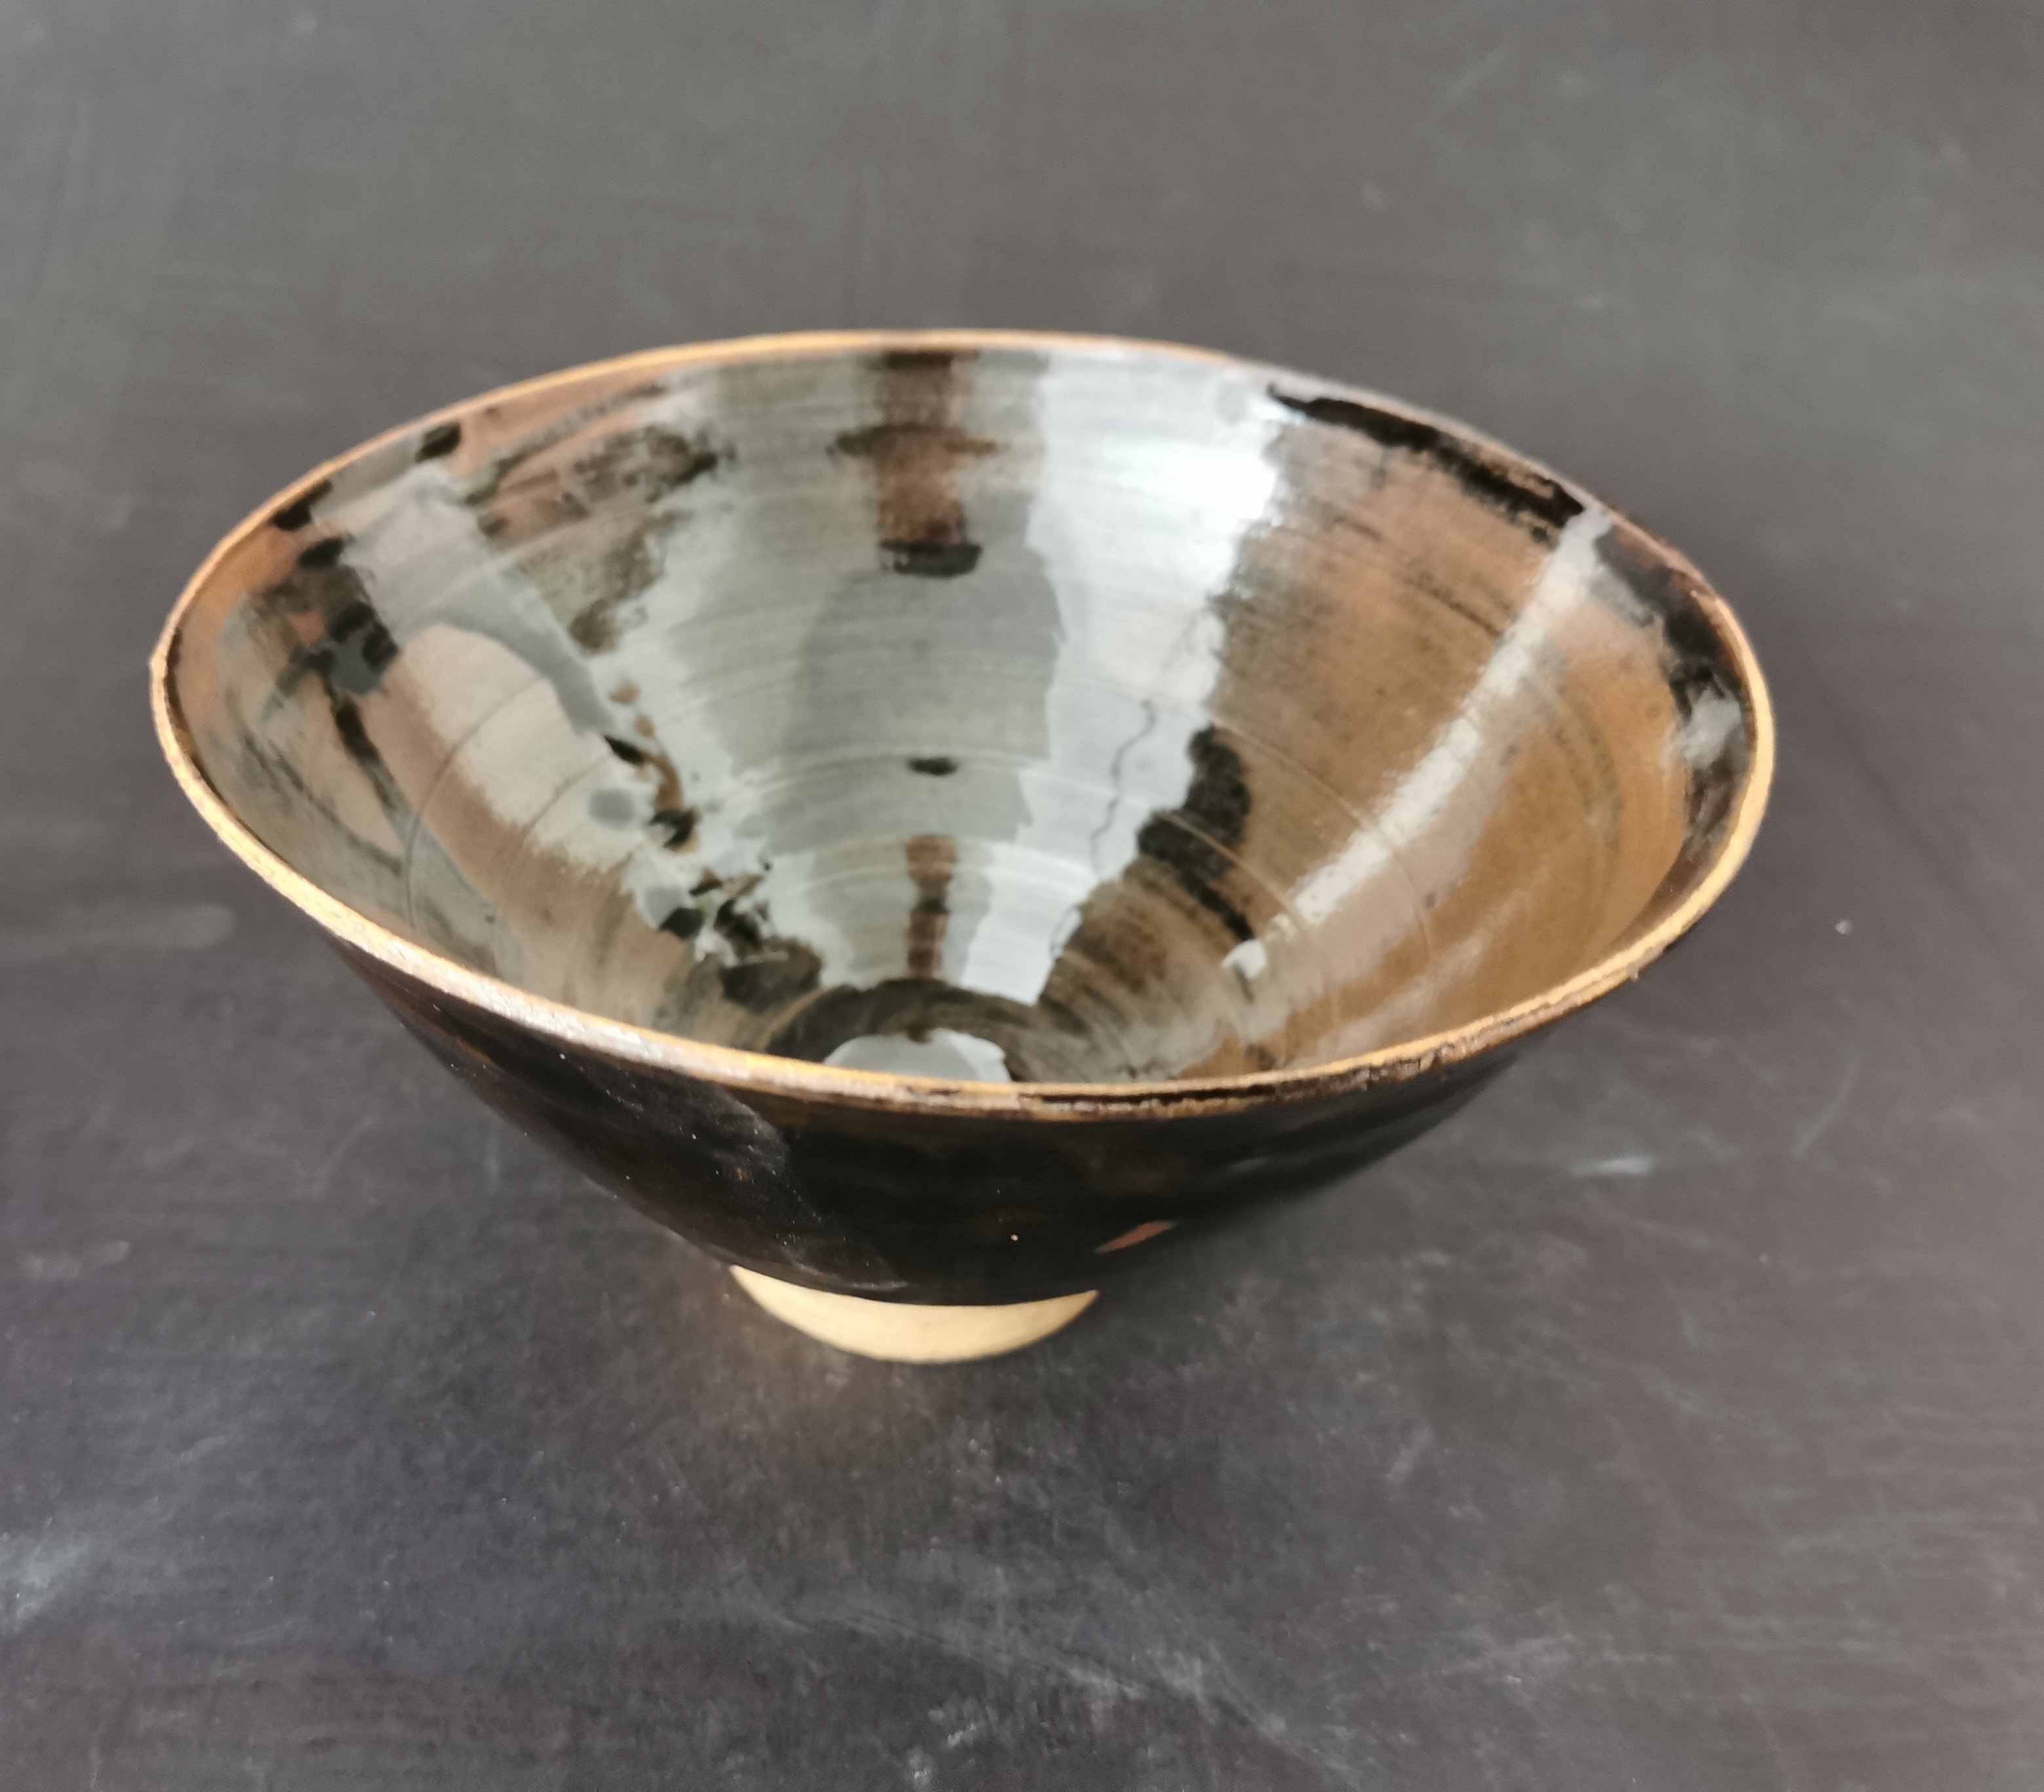 Conical bowls